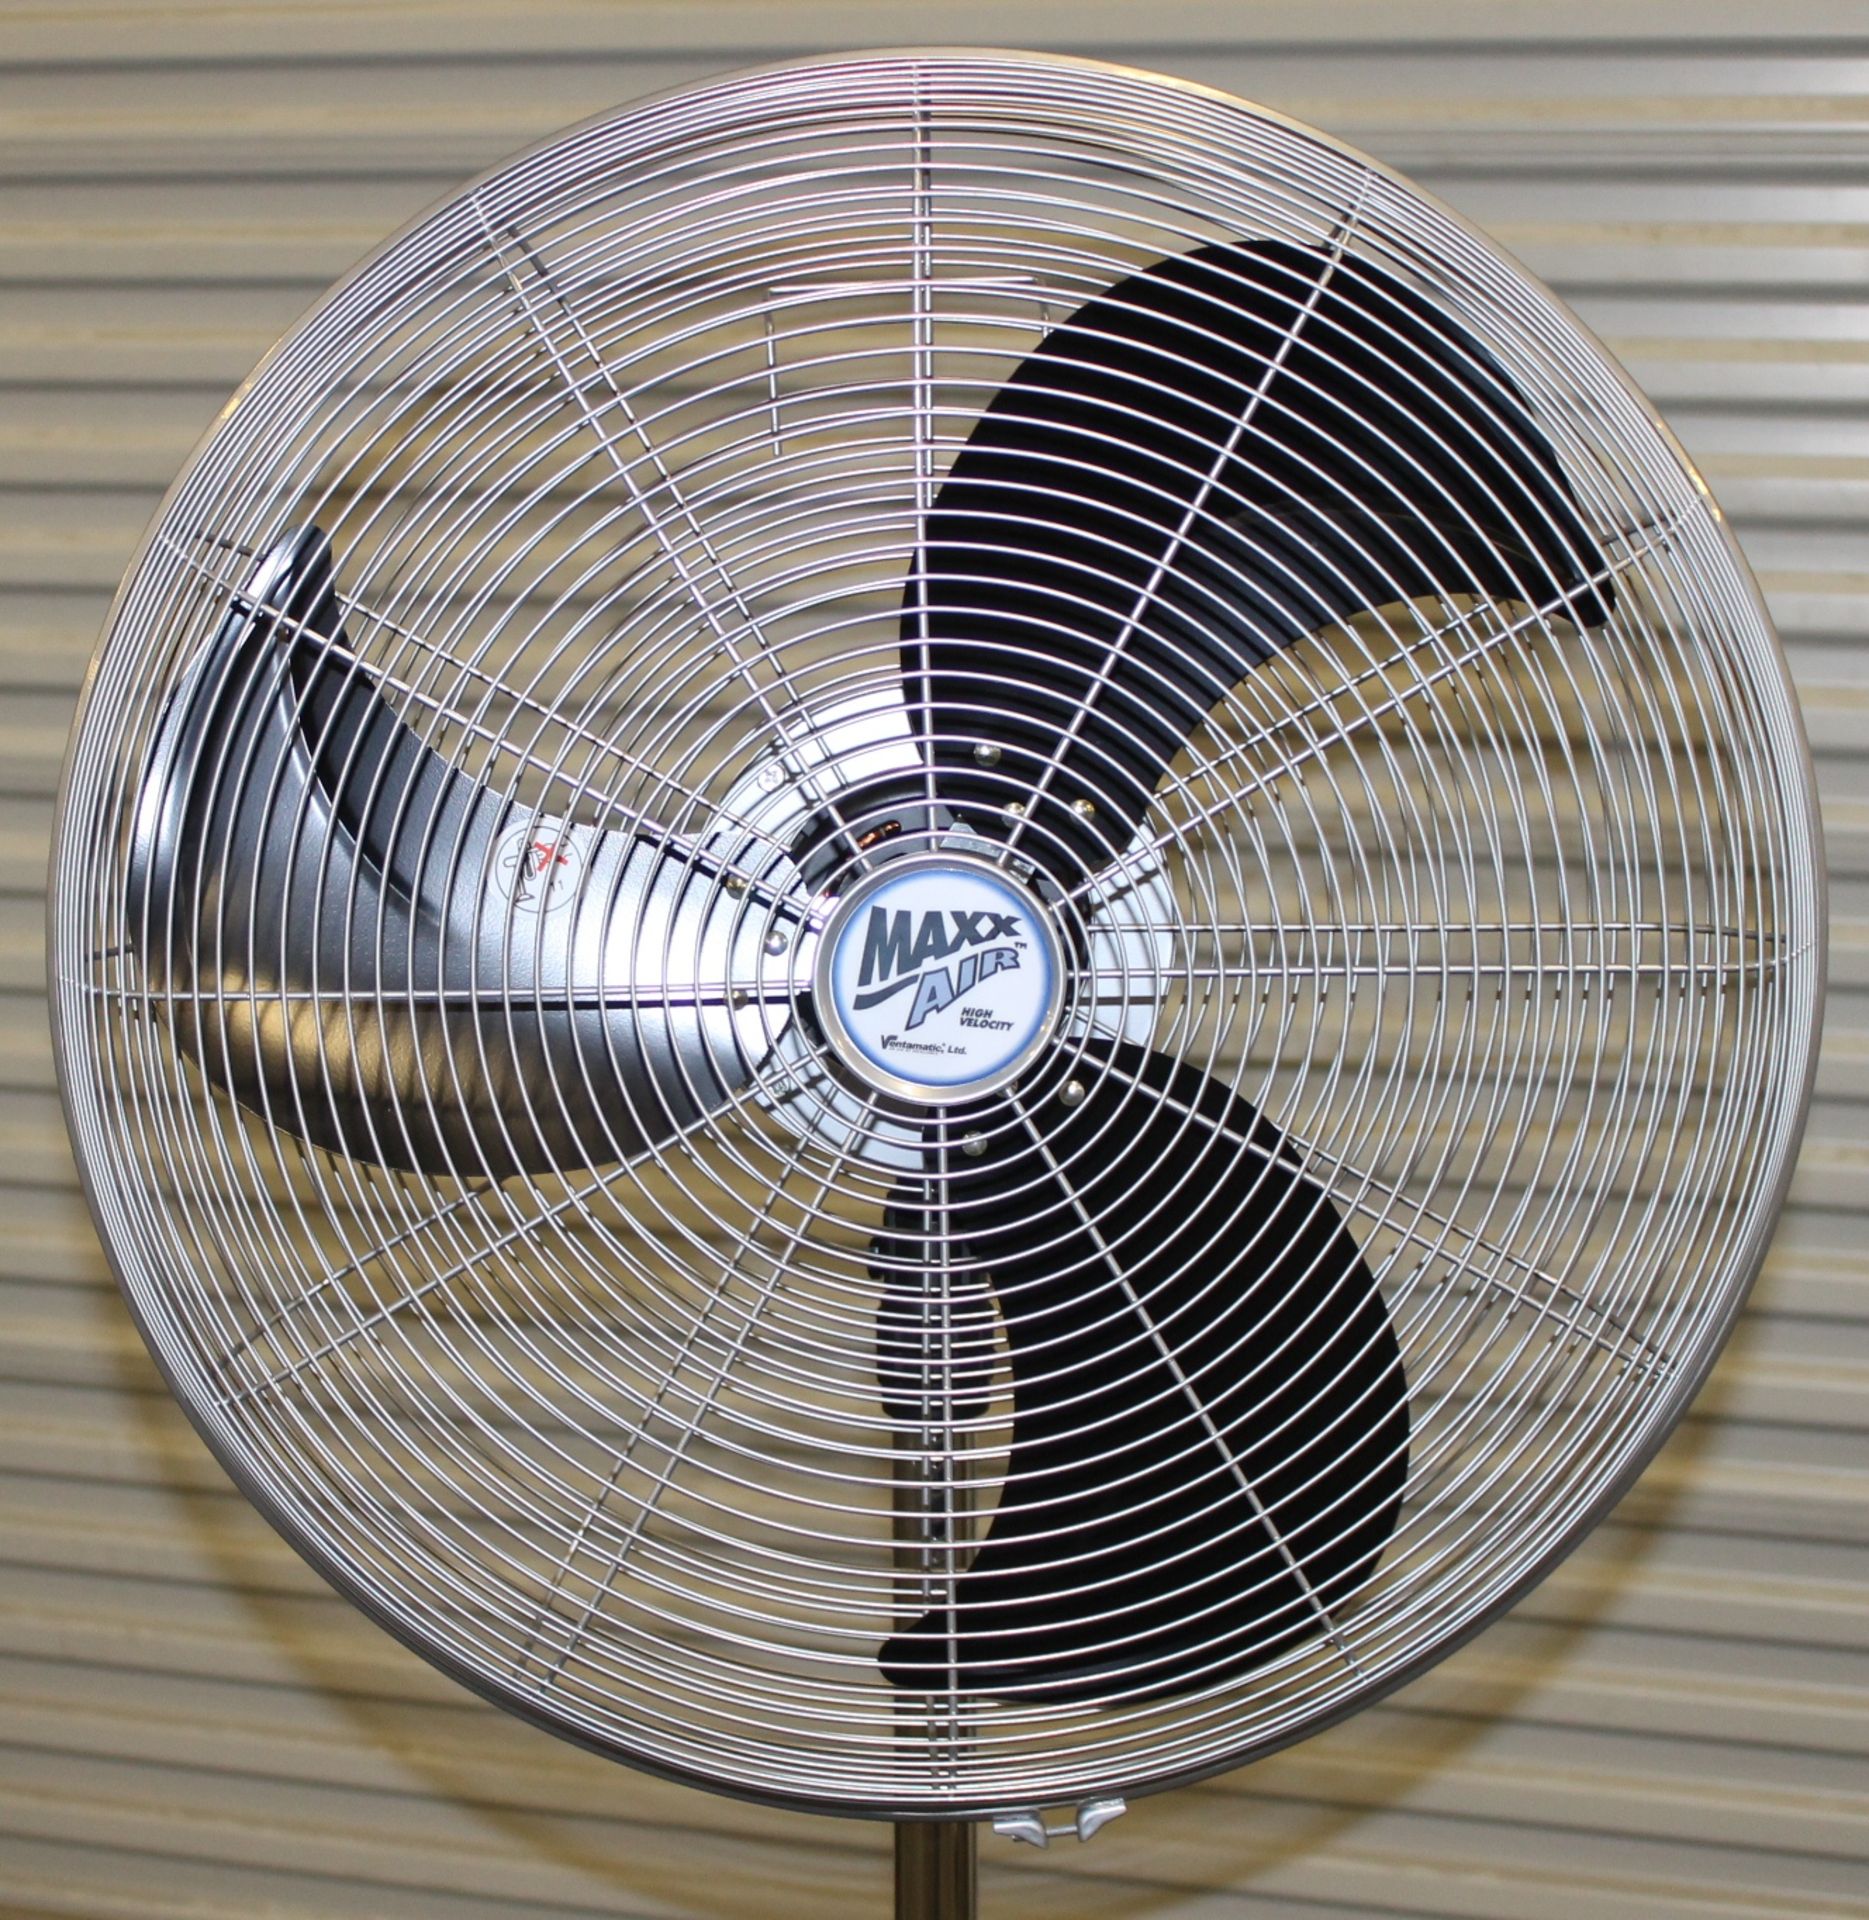 22" OSCILLATING PEDESTAL FAN,  HEAVY DUTY 3-SPEED THERMALLY PROTECTED MOTOR,